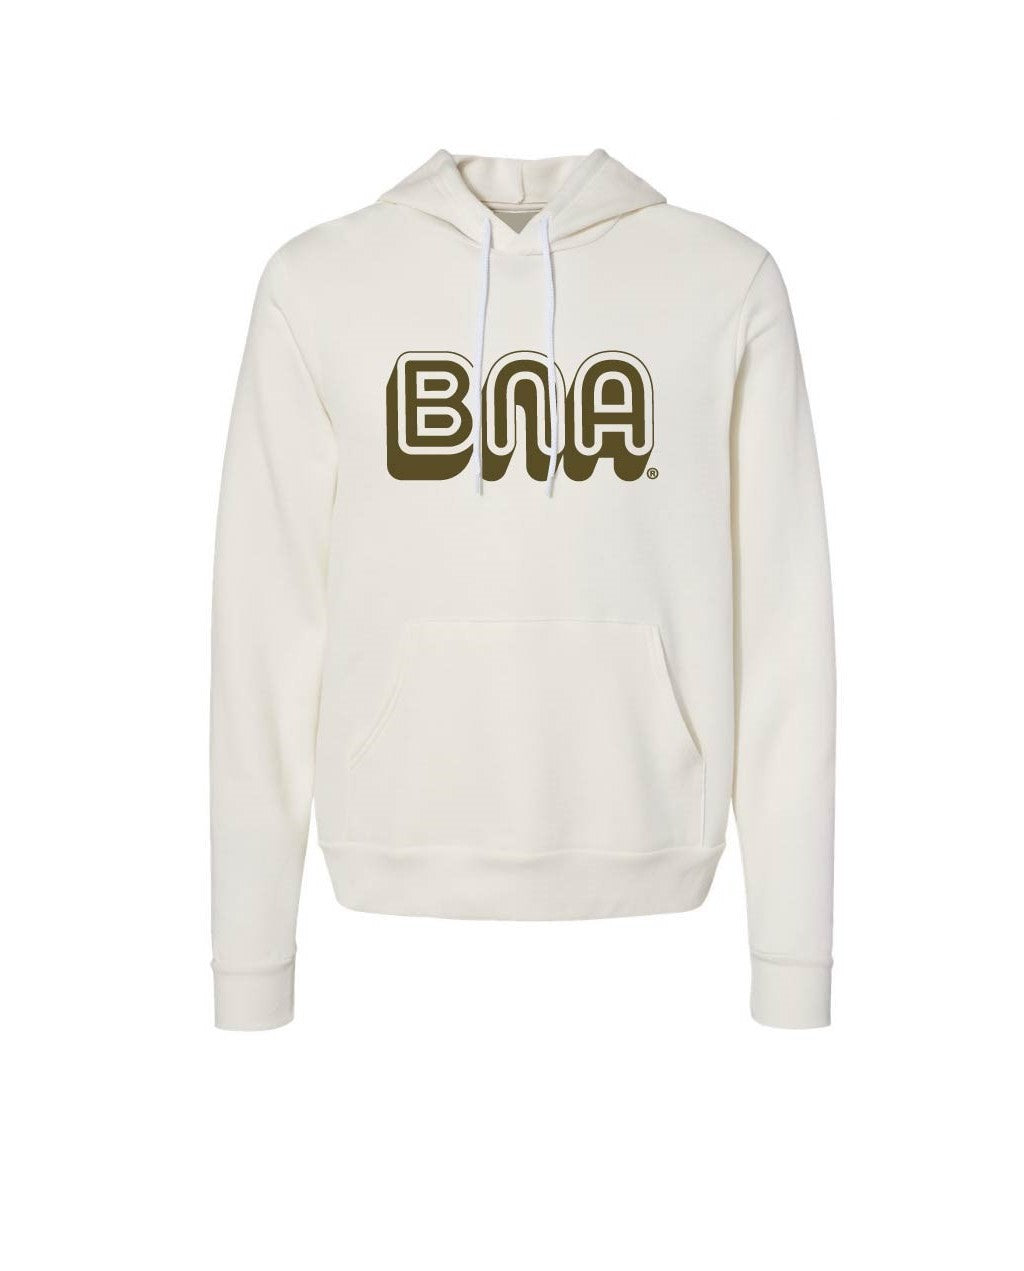 Mock-up is shown wearing vintage white hoodie with olive green BNA art on the chest.  BNA is shown in a stylized, retro bubble letter design.